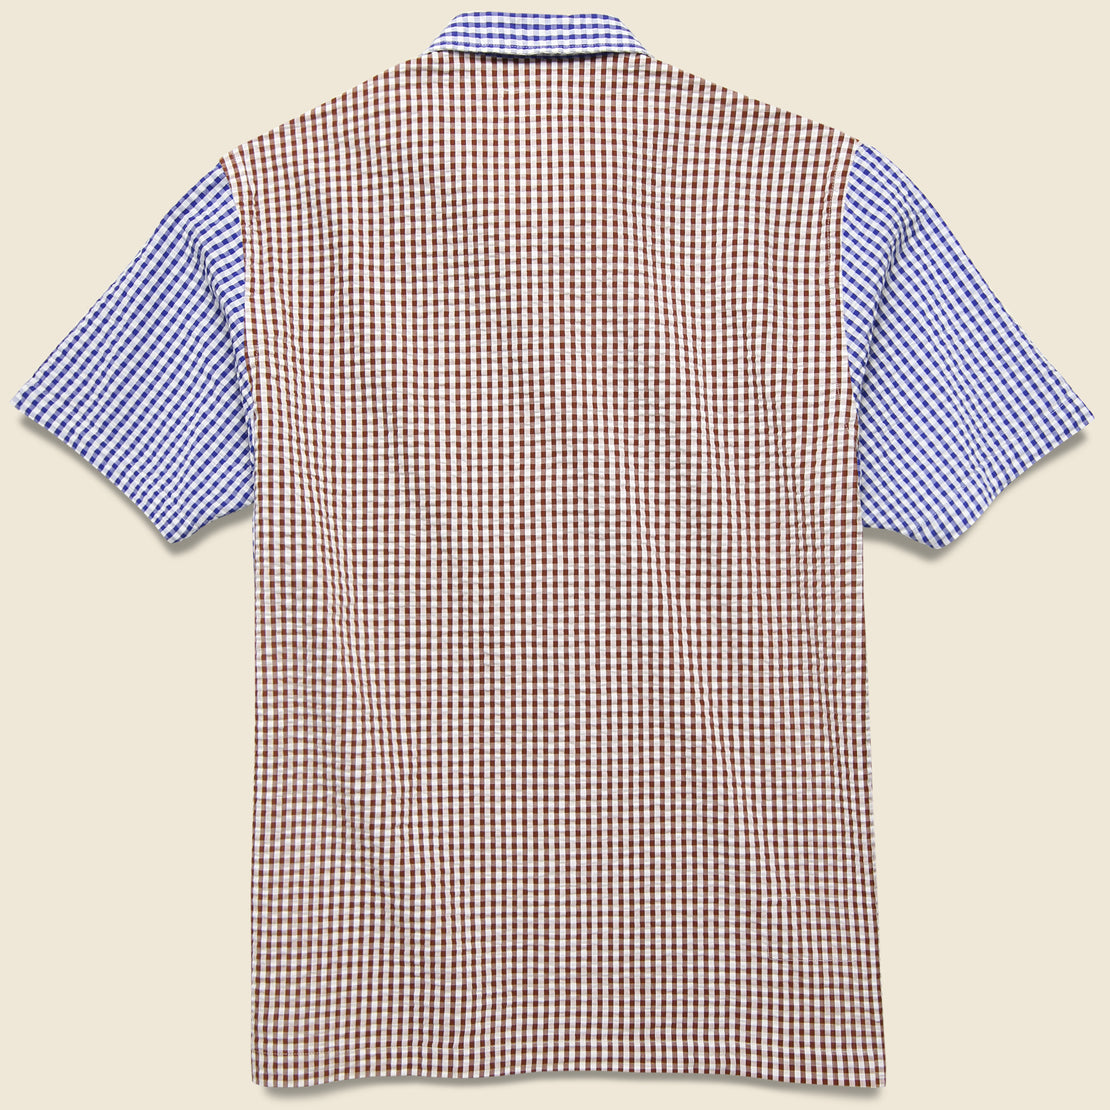 Road Shirt - Blue/Brown Gingham Seersucker - Universal Works - STAG Provisions - Tops - S/S Woven - Other Pattern